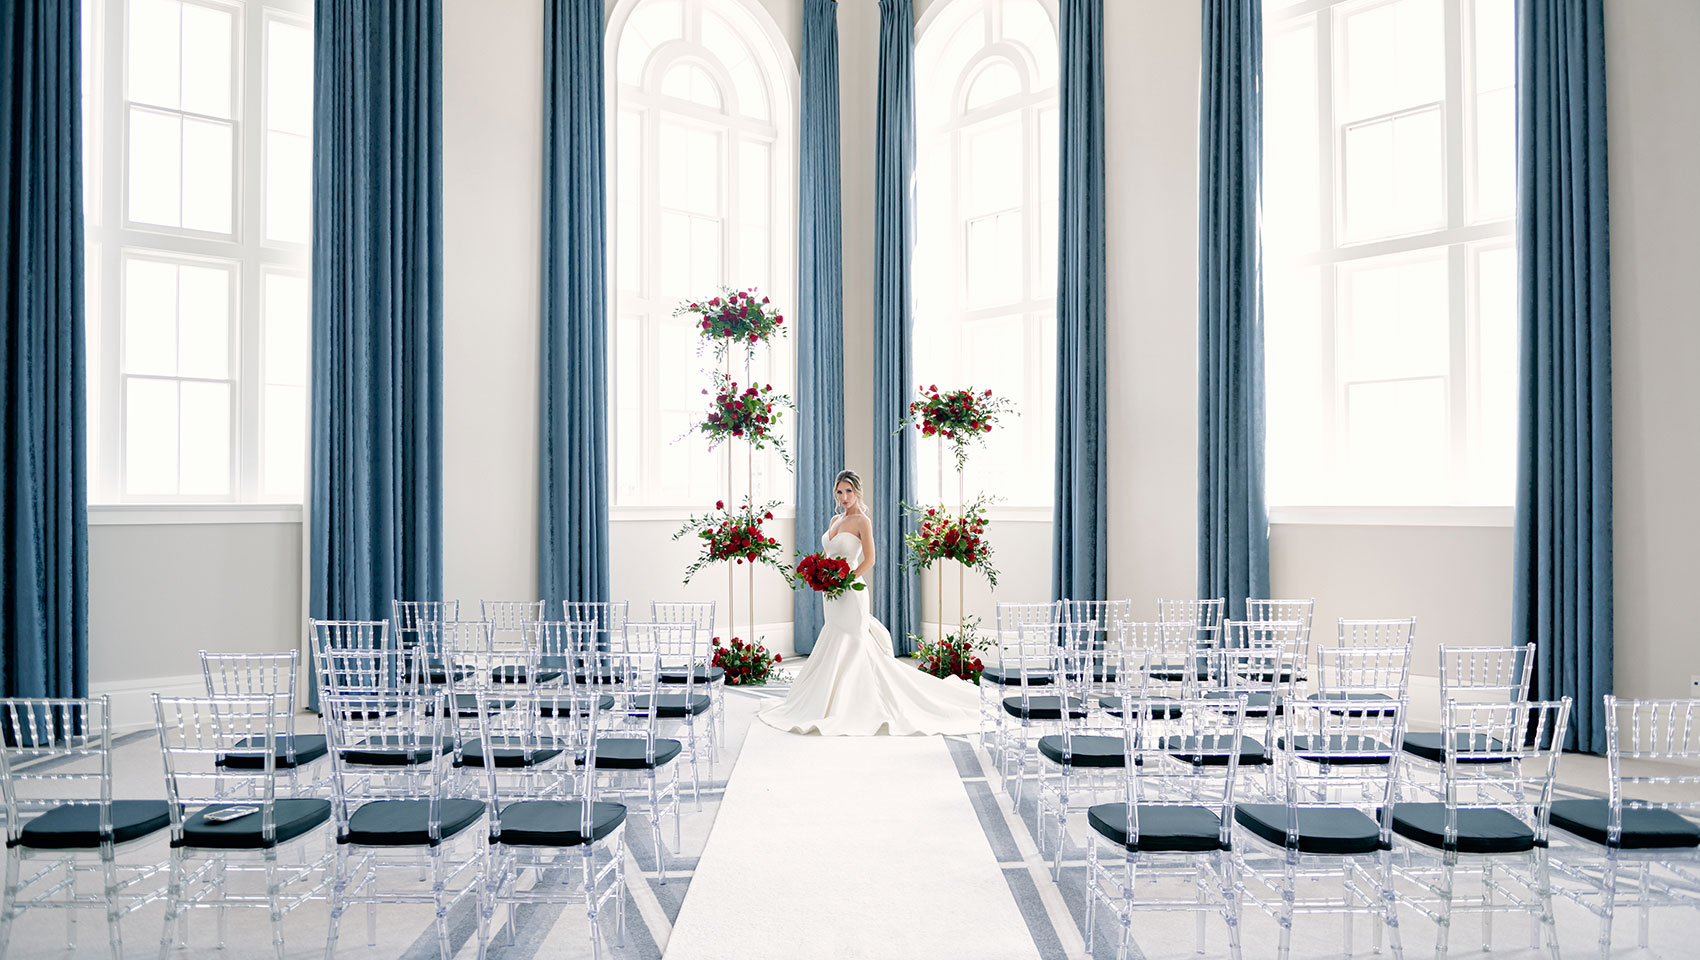 ballroom set up for a wedding with chairs and a bride standing at altar